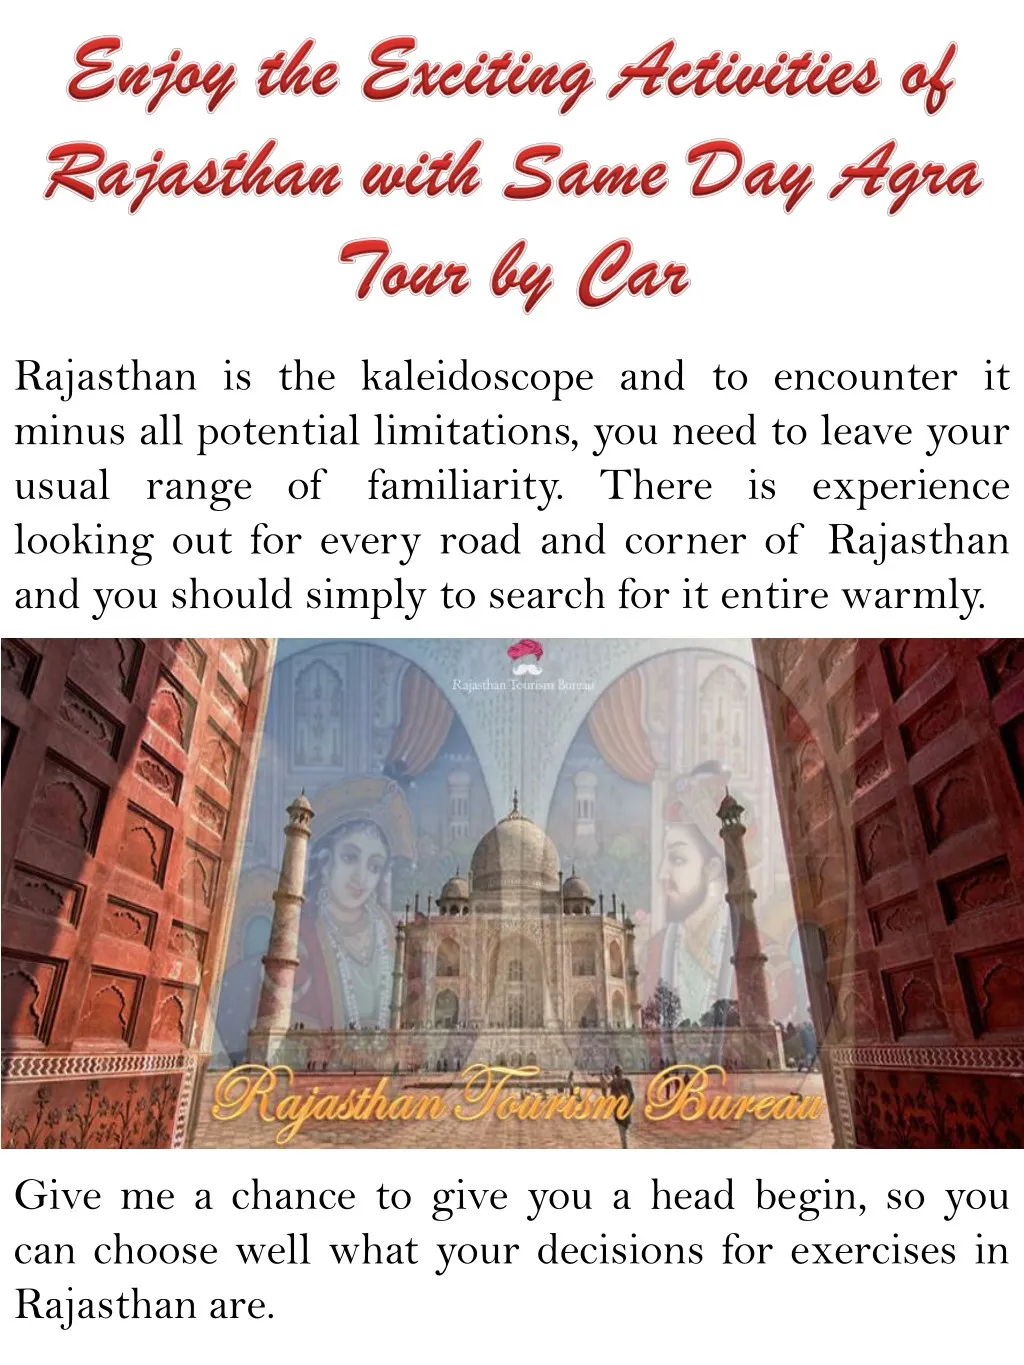 rajasthan is the kaleidoscope and to encounter